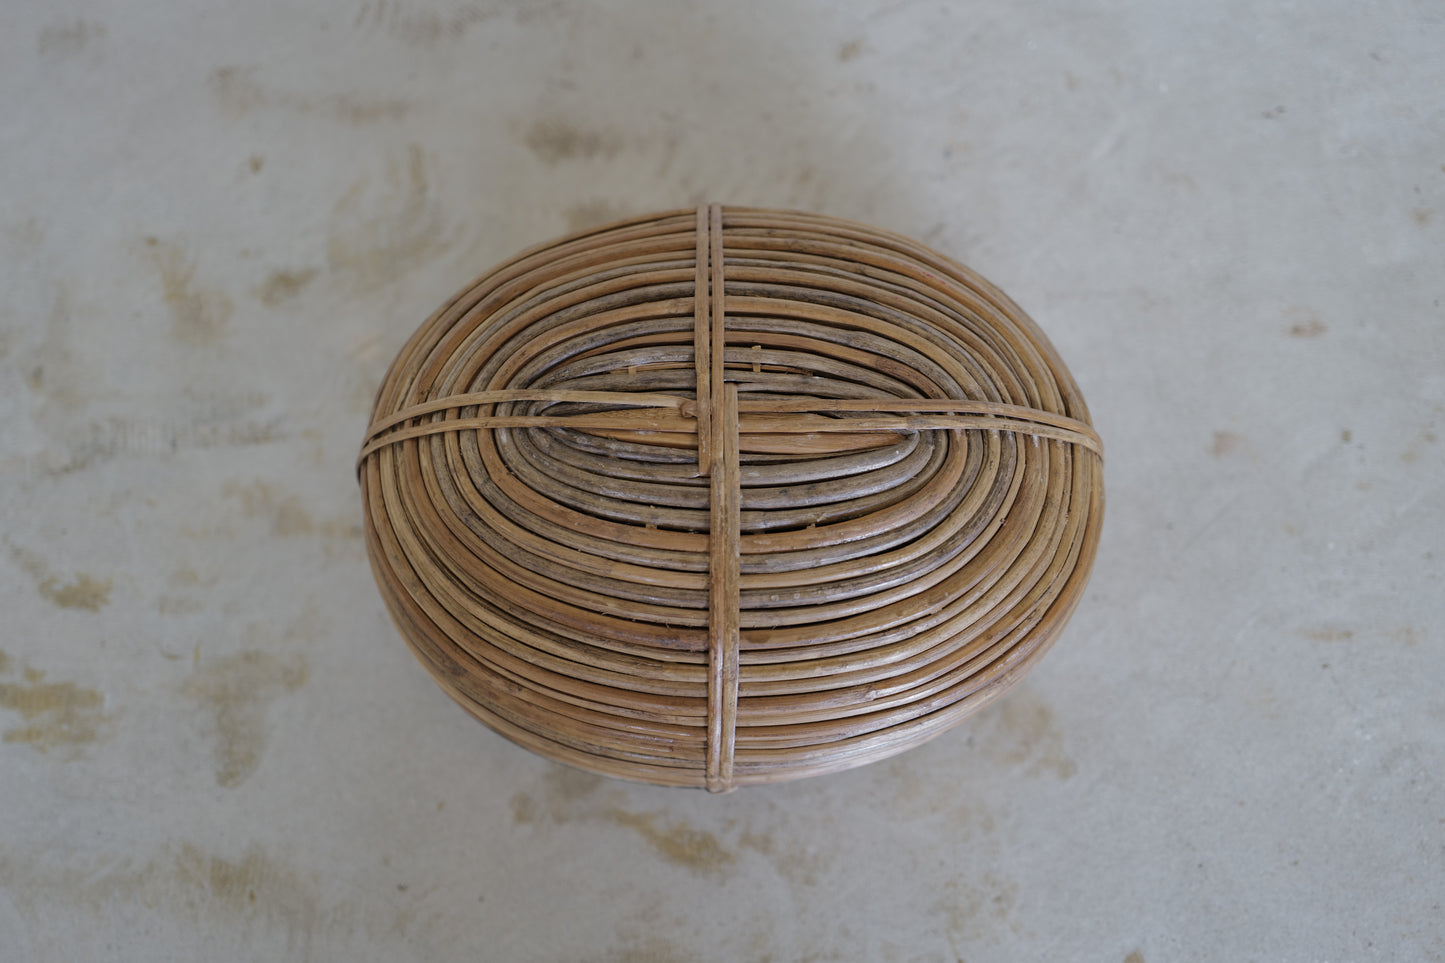 Rattan and Brass Bowl in the Style of Gabriella Crespi, 1960s Italy